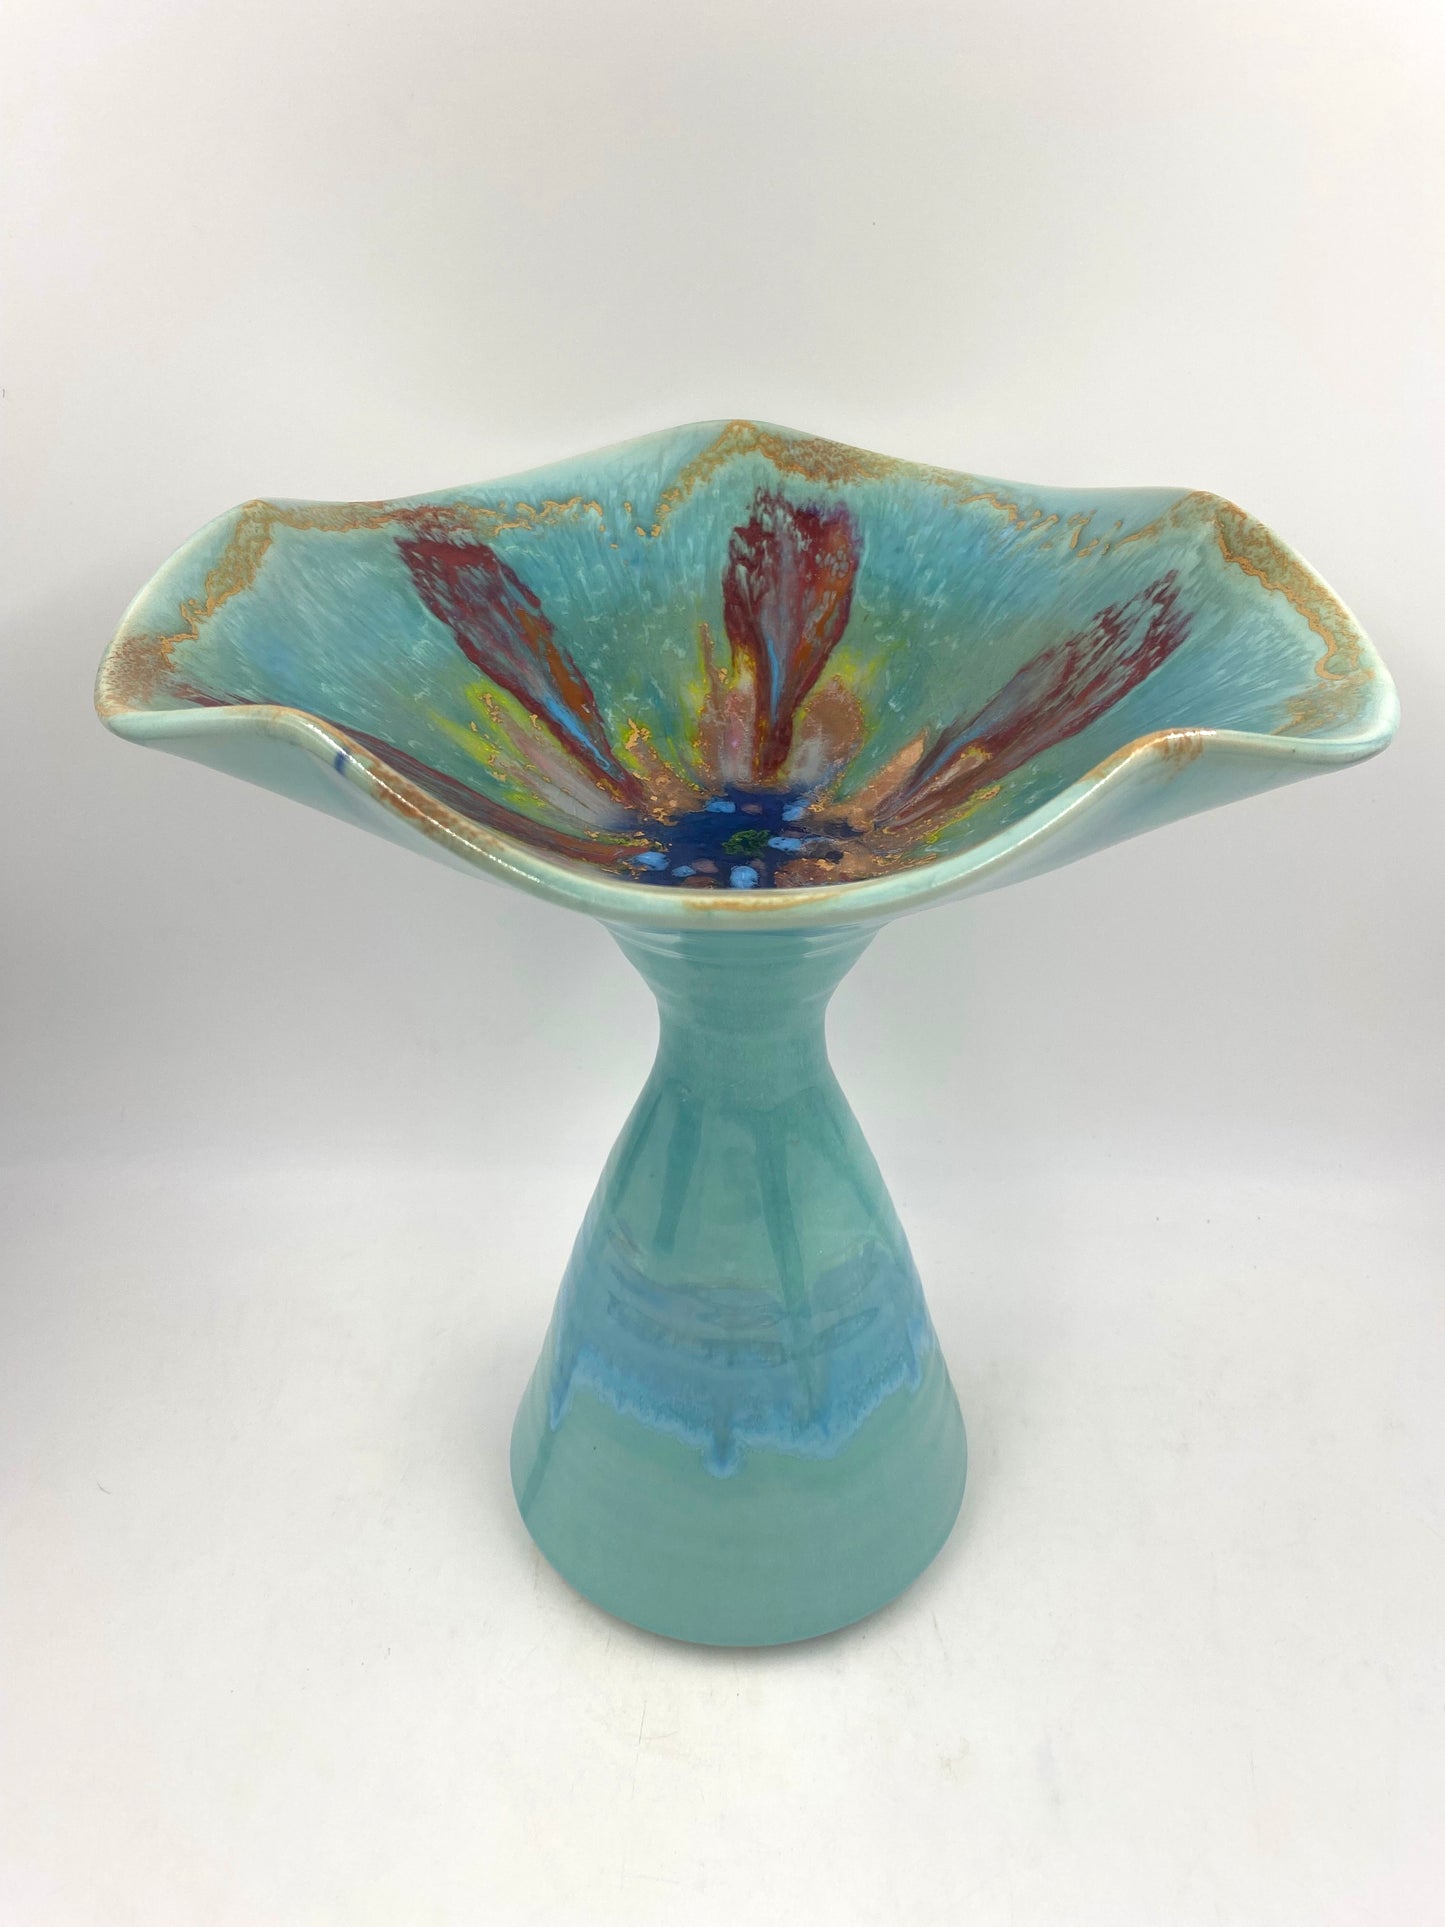 Sand Dollar Compote Bowl